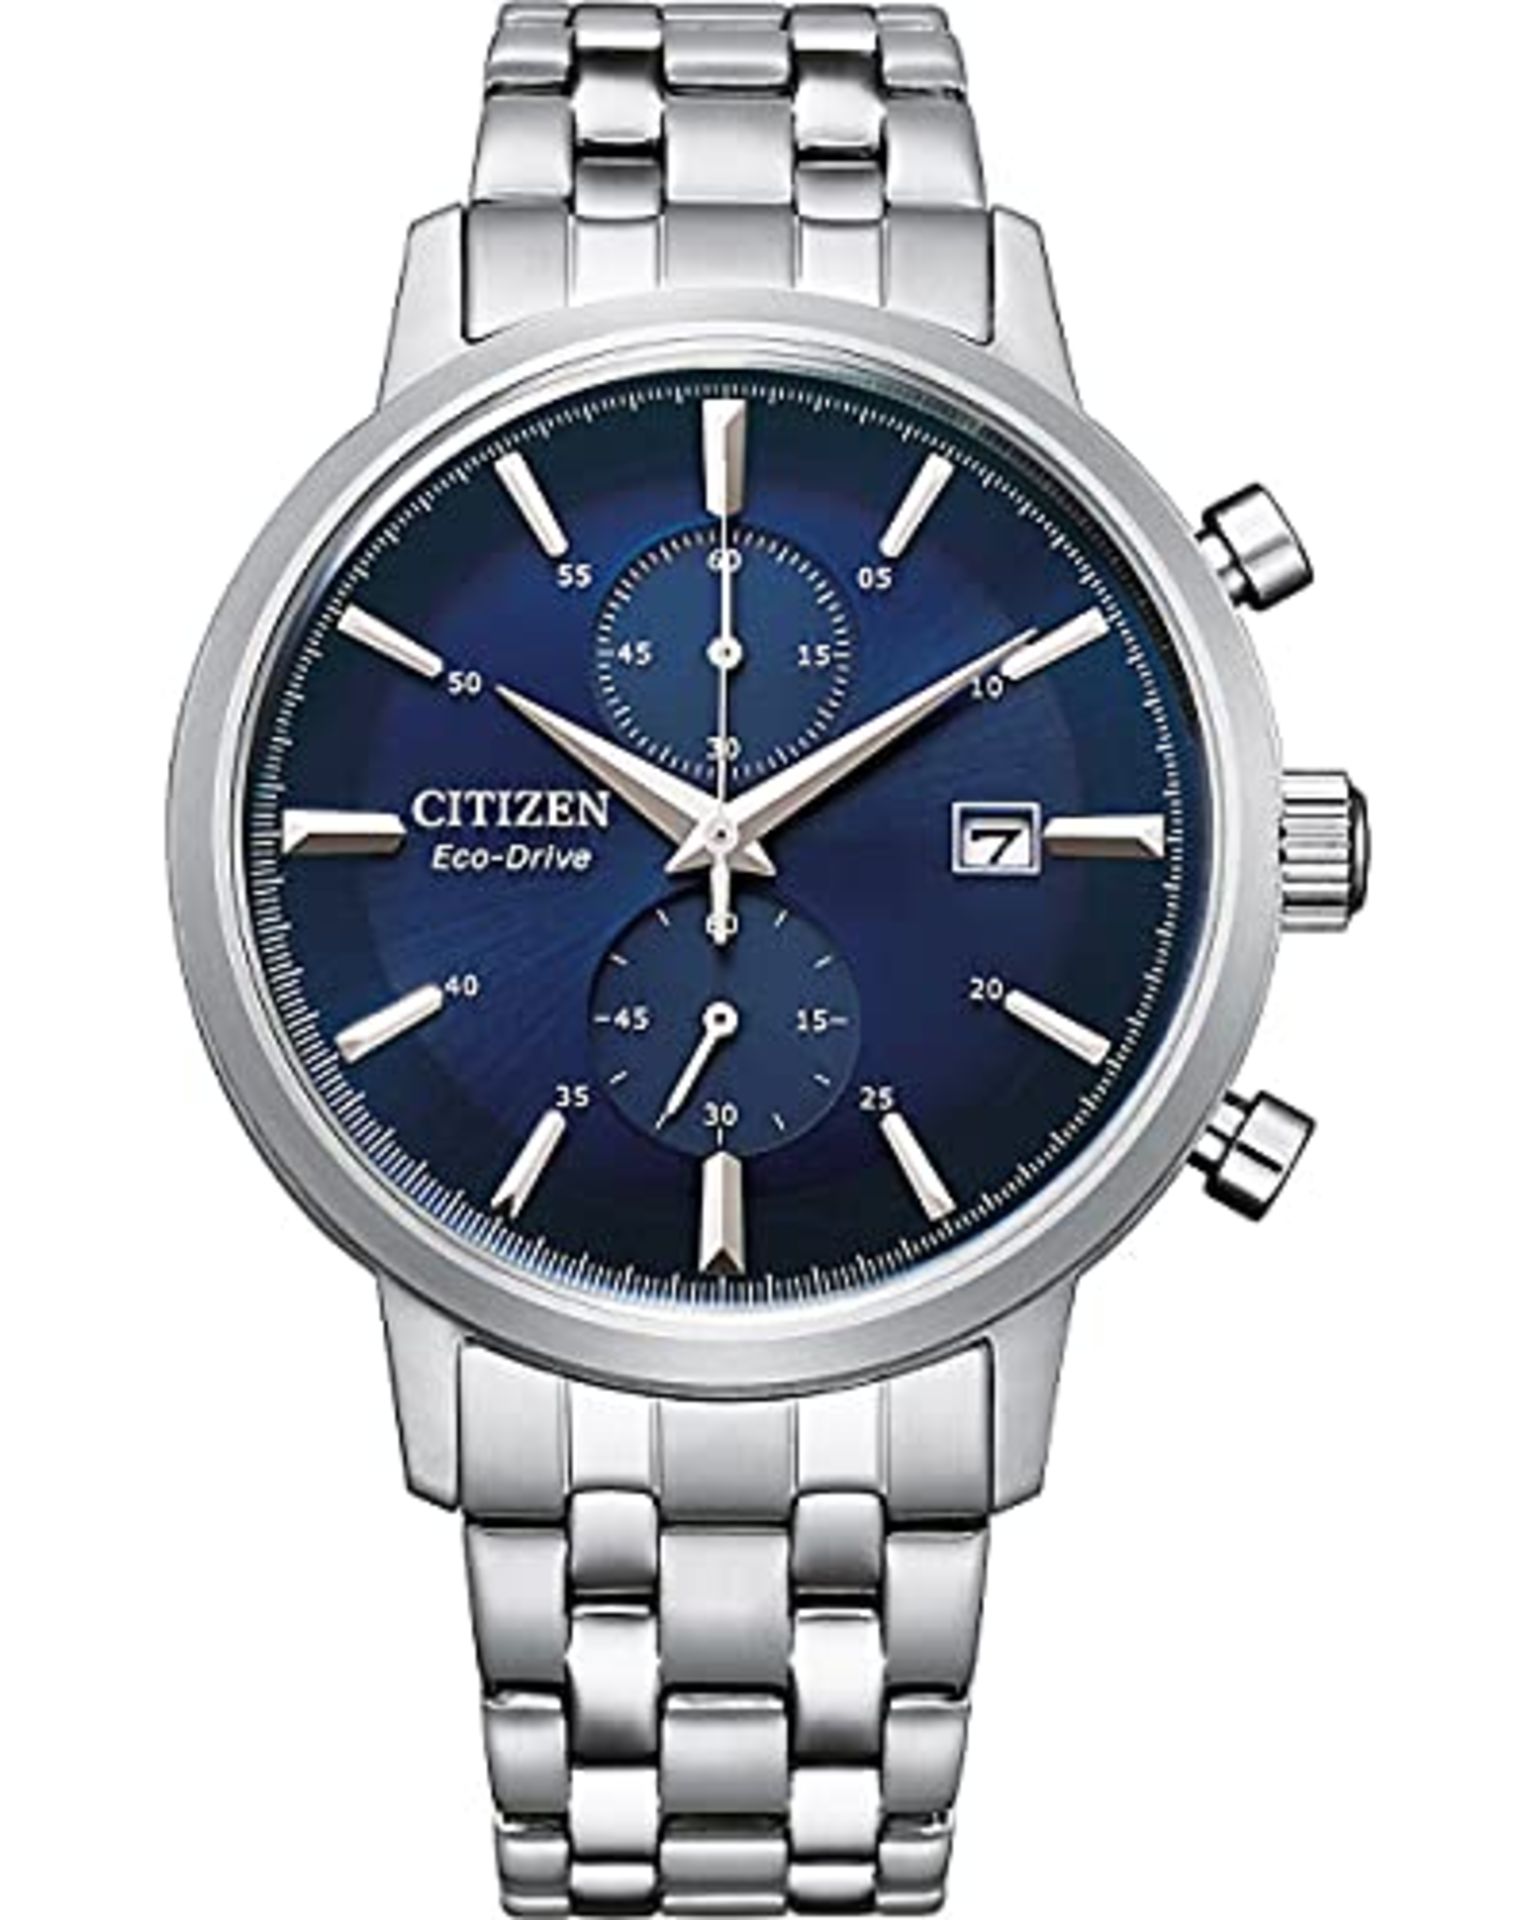 RRP £149.00 Citizen Men's Quartz Chronograph Watch with Stainless Steel Band CA7060-88L - Image 4 of 6